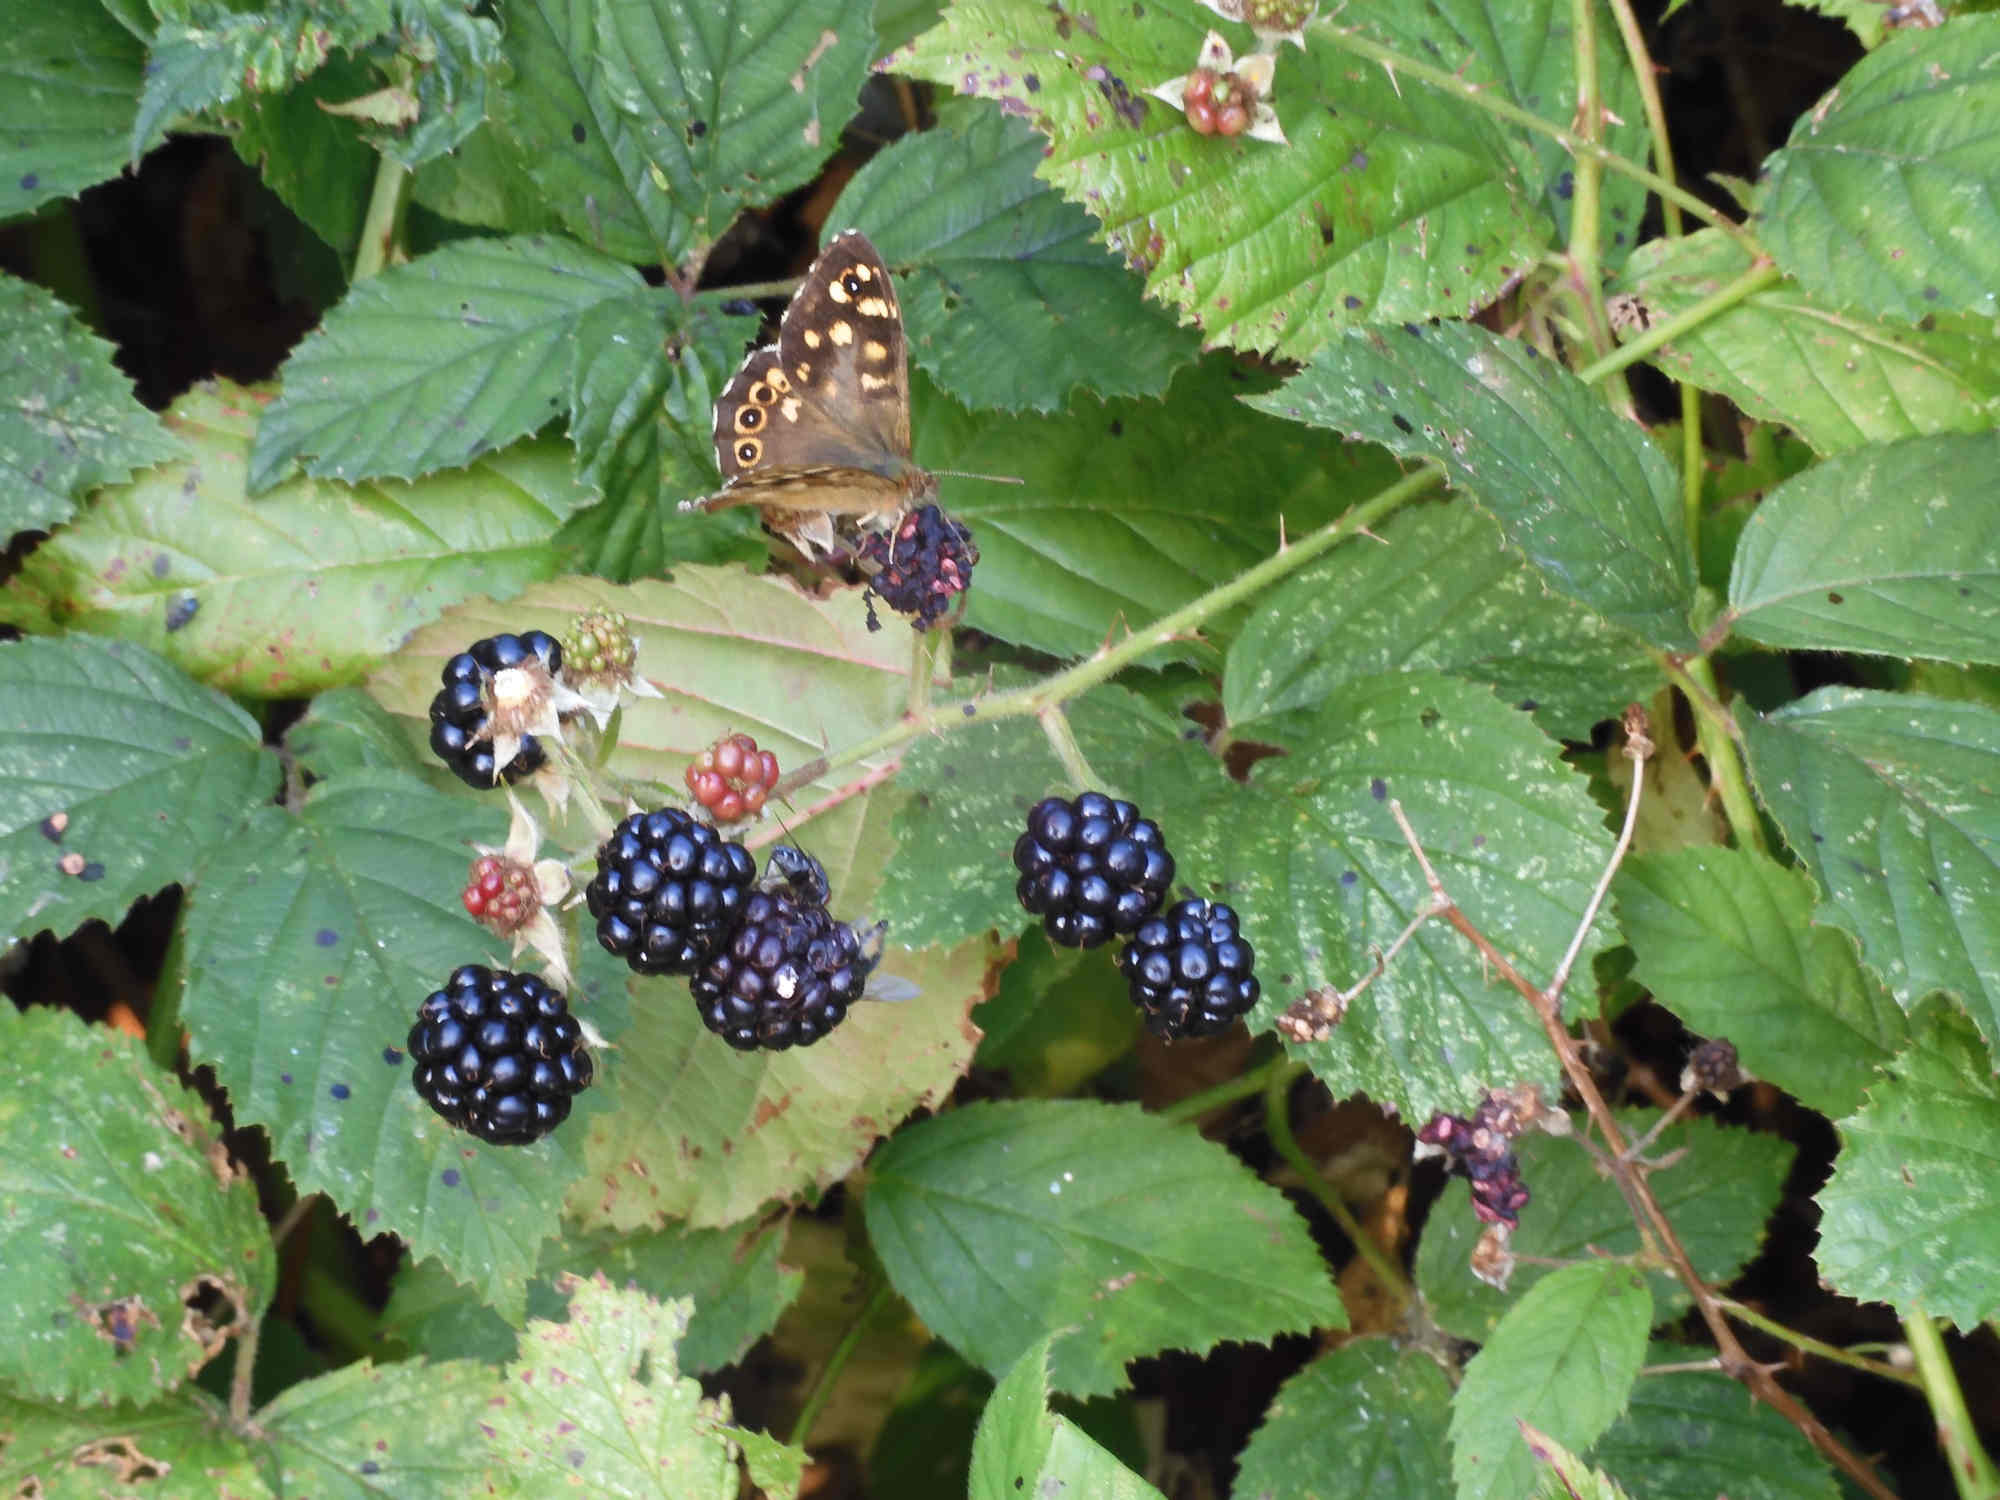 In the autumn Speckled Woods adore the blackberries.